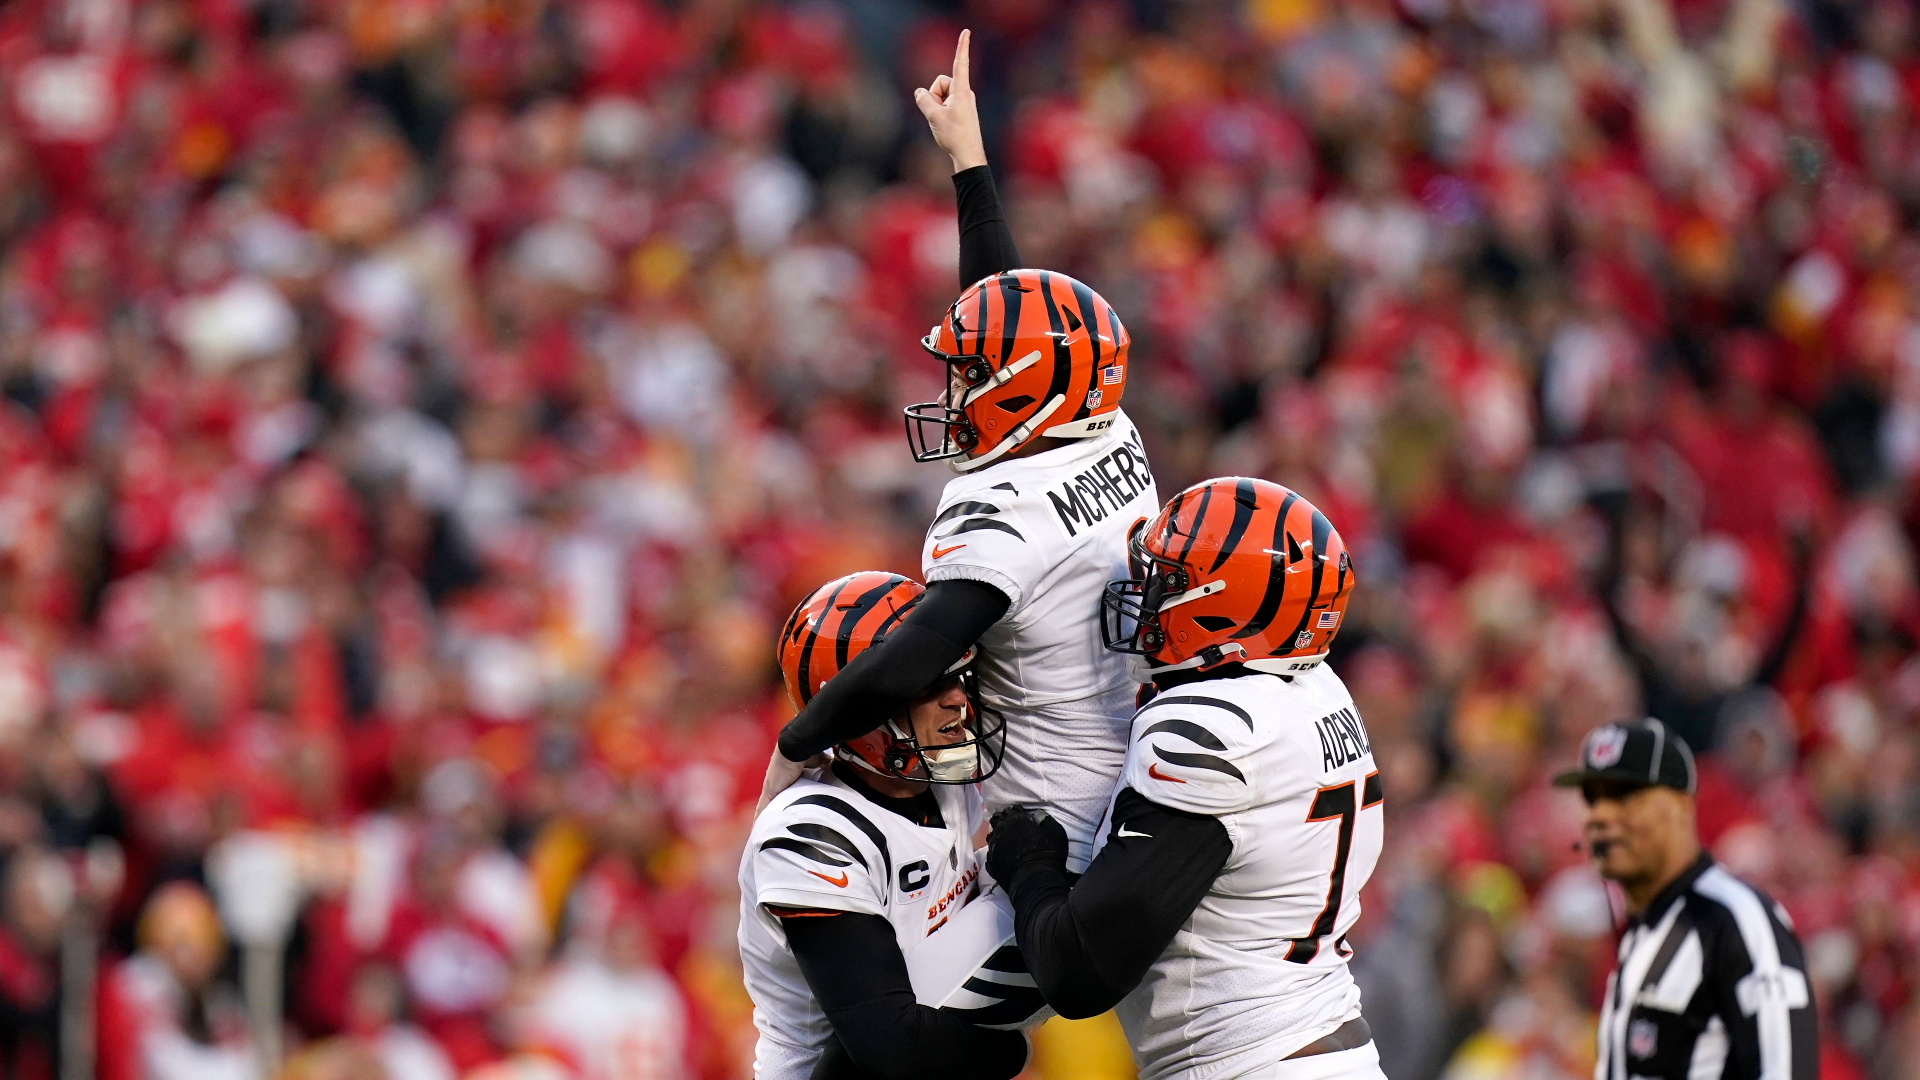 Want to see the Bengals play at the Super Bowl? Here are things to know